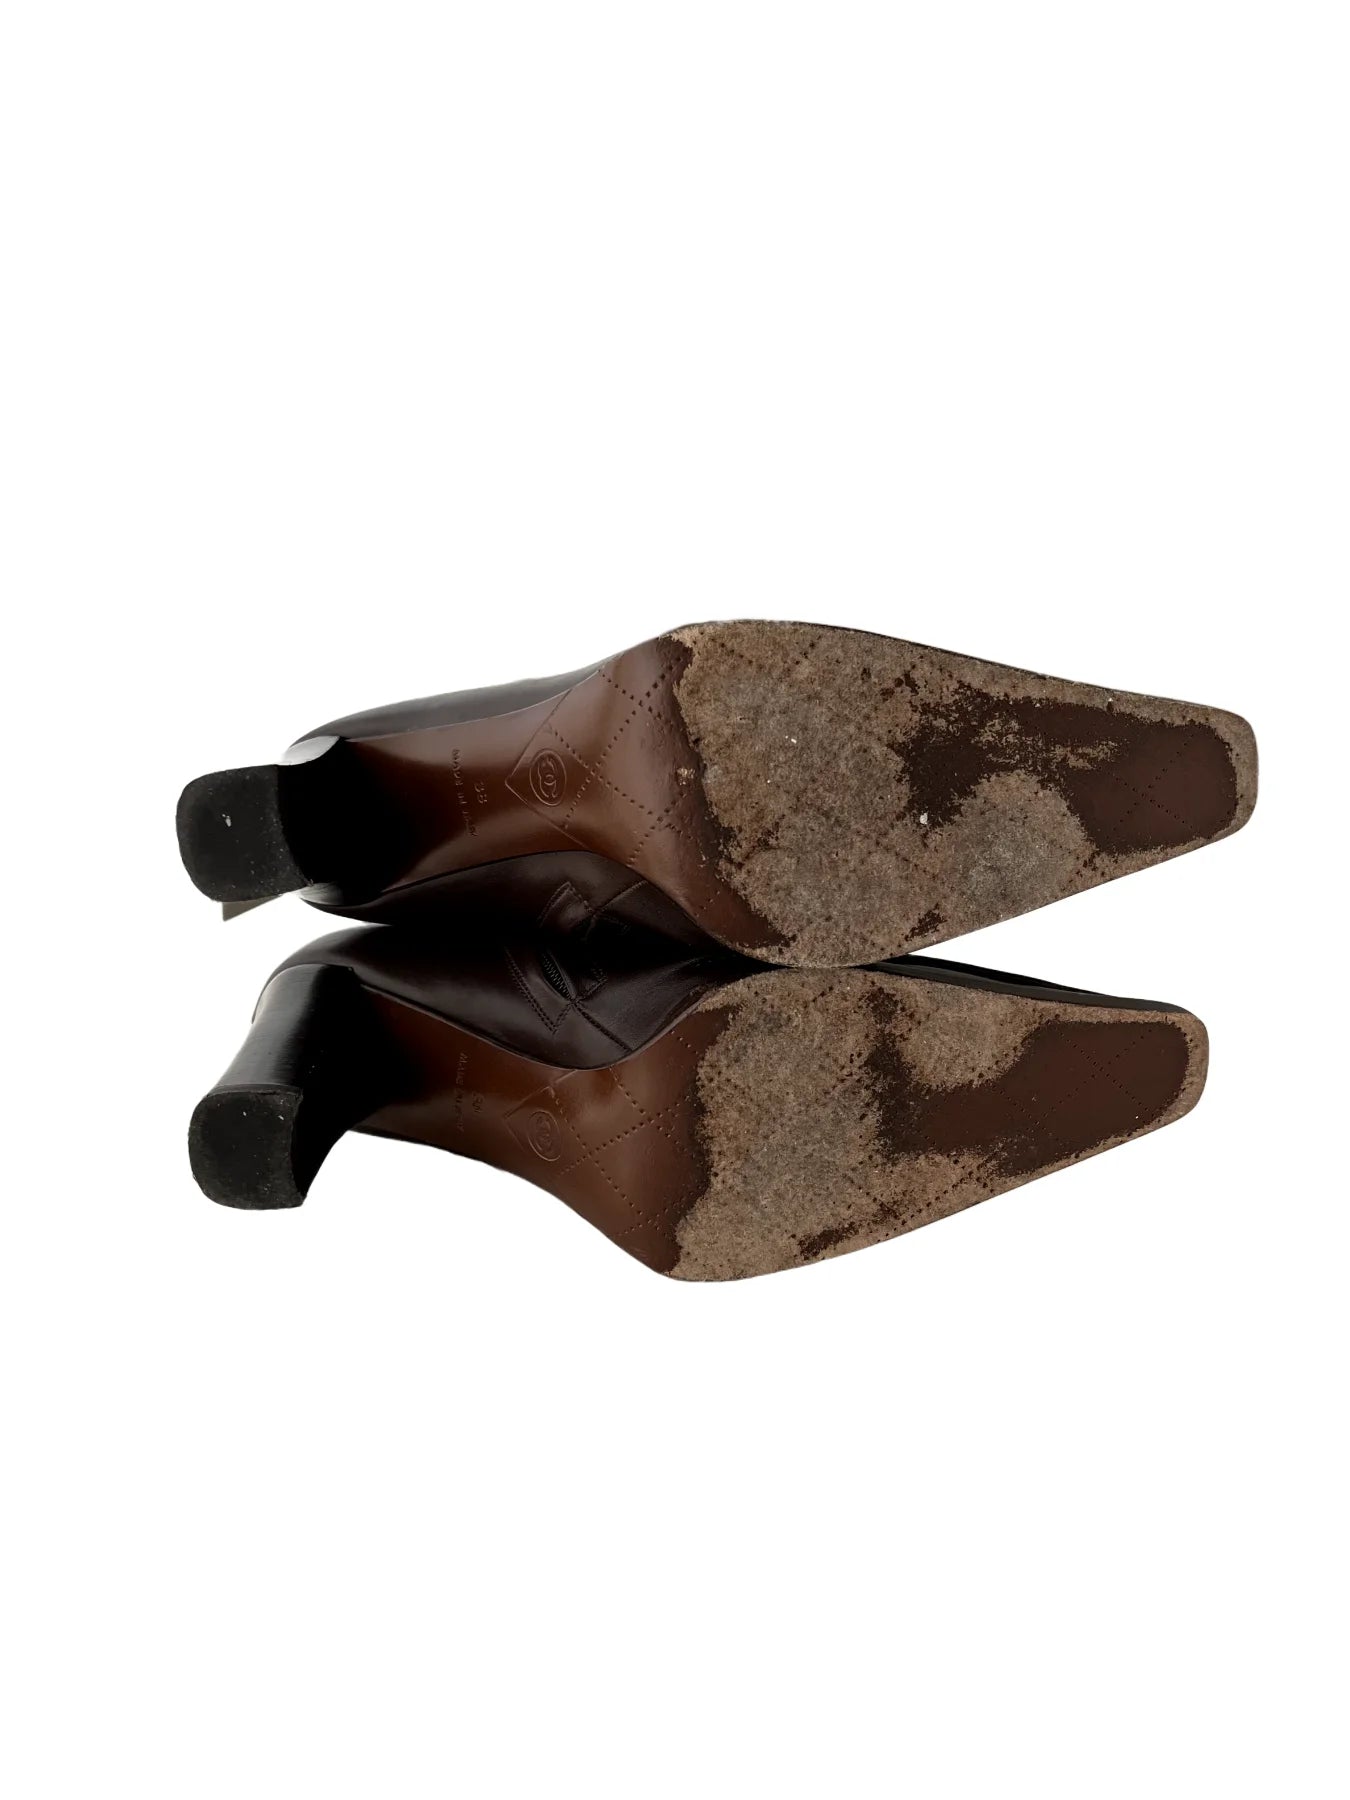 Chanel leather chocolate brown booties, 38